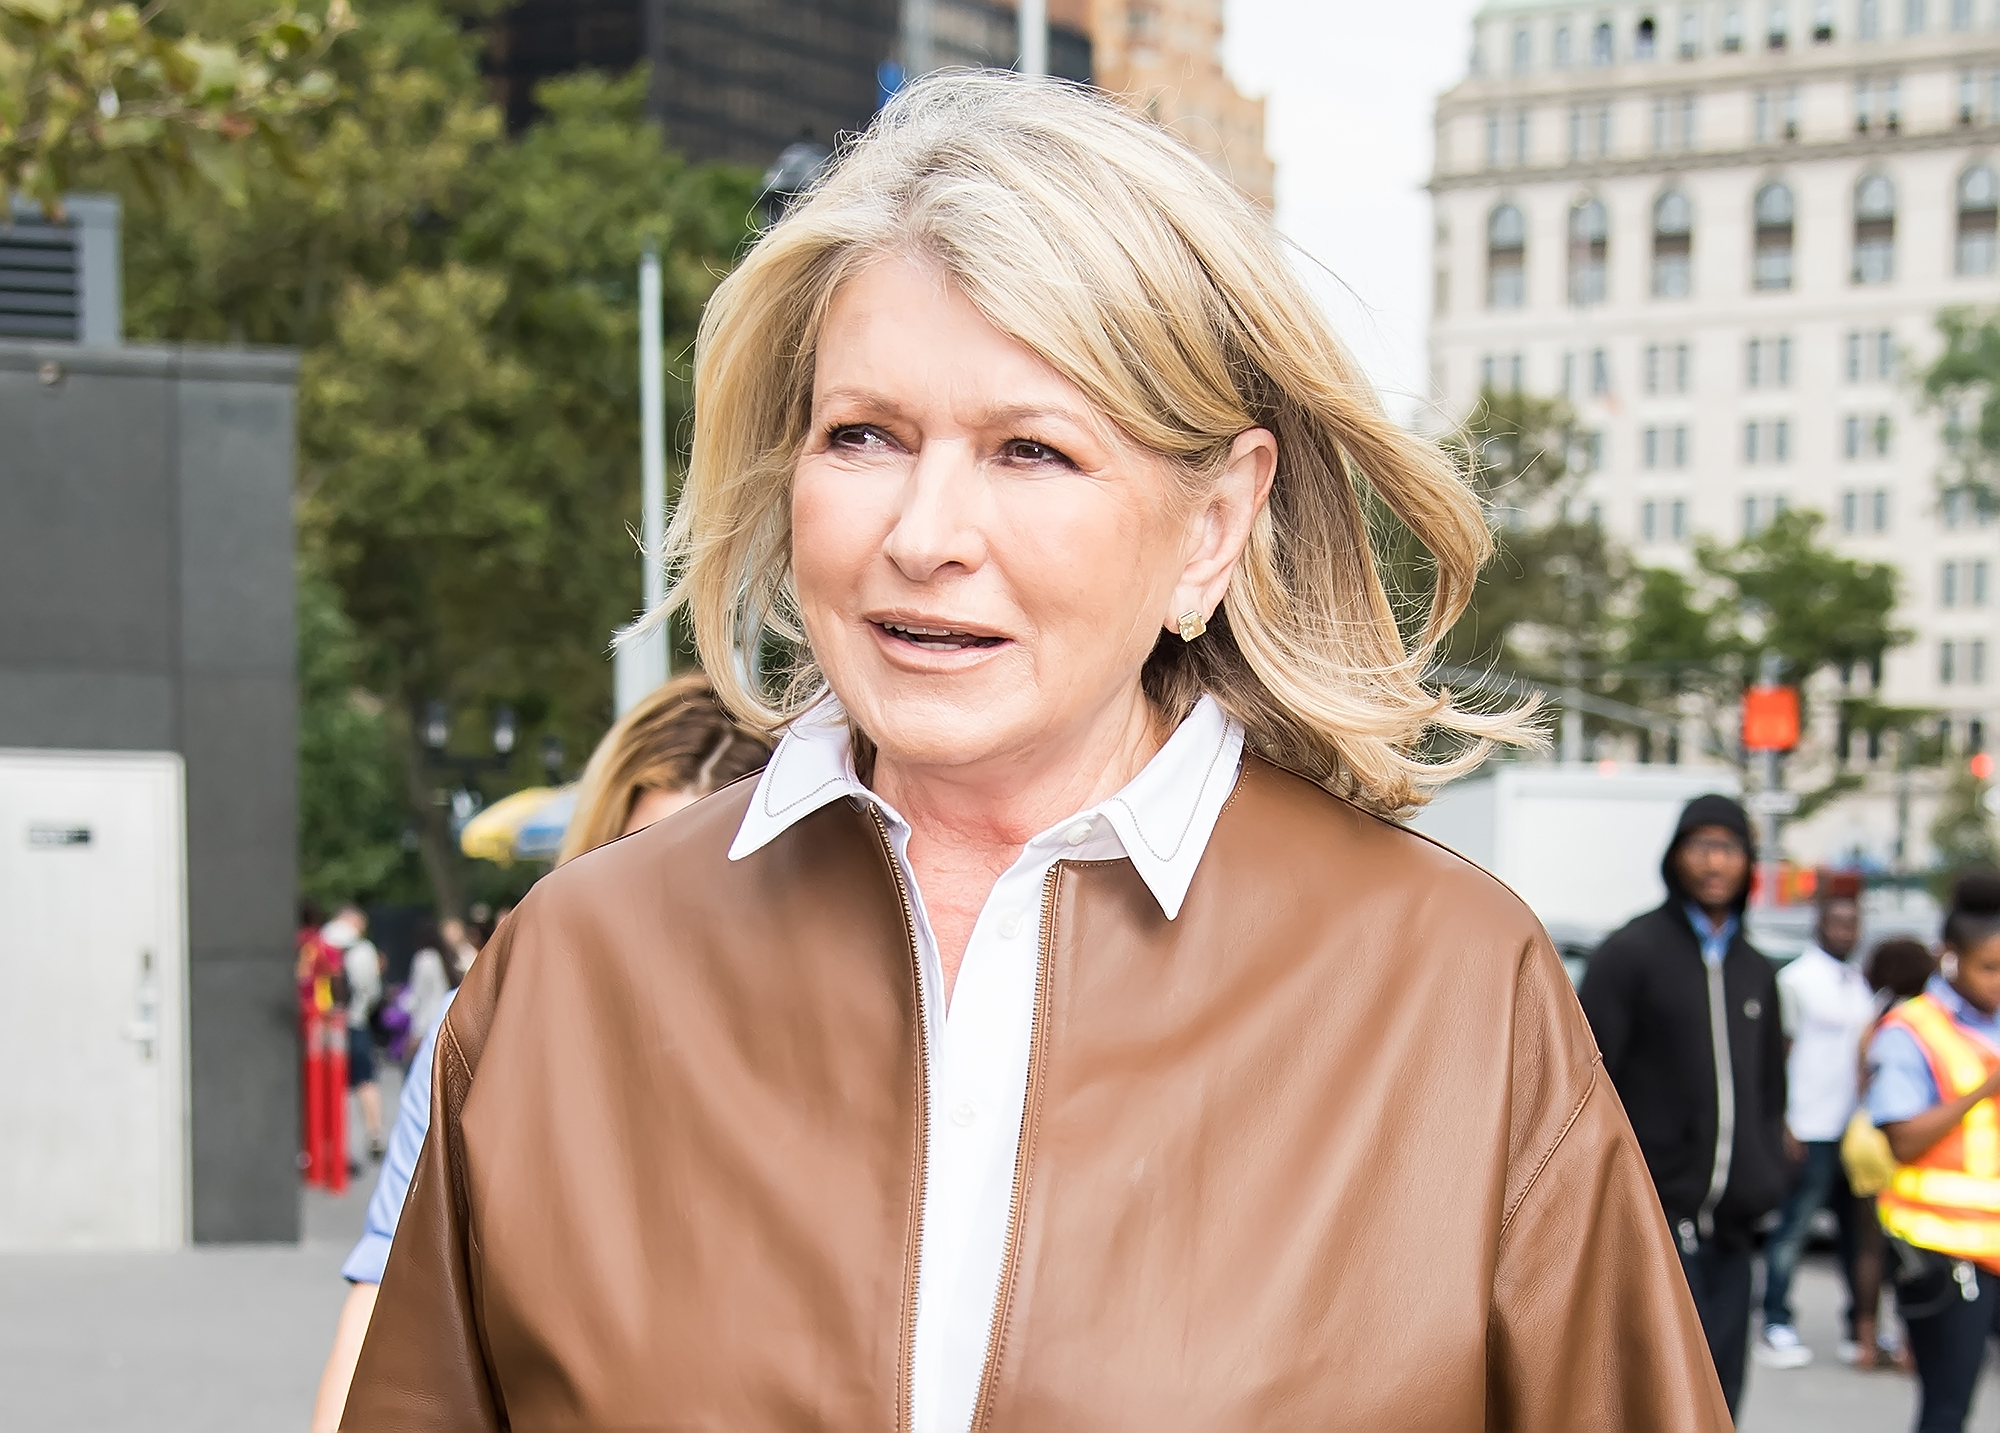 Martha Stewart walks outdoors in a city, wearing a brown jacket over a white top, with a background of buildings and people